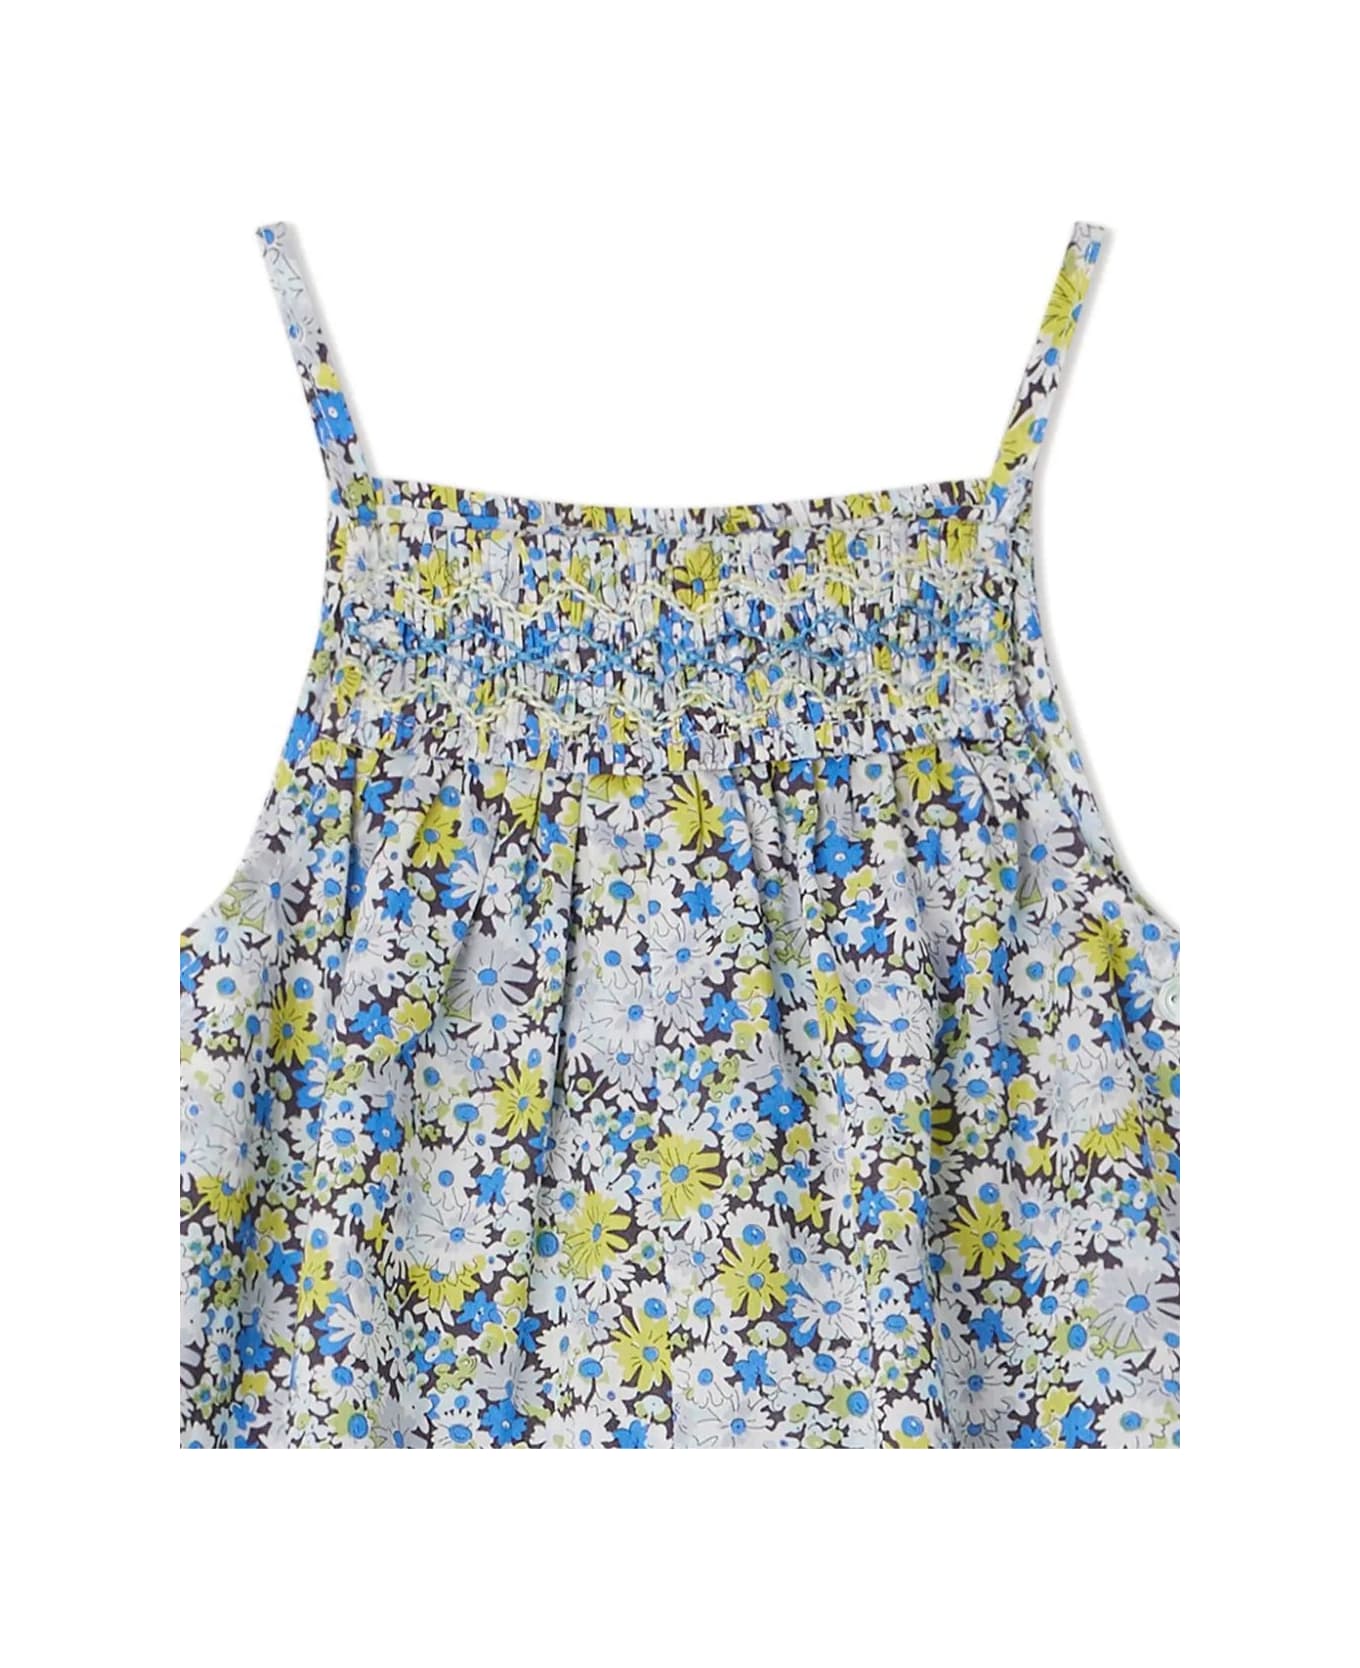 Bonpoint Lilisy Smocked Overalls In Blue Flowers - Blue